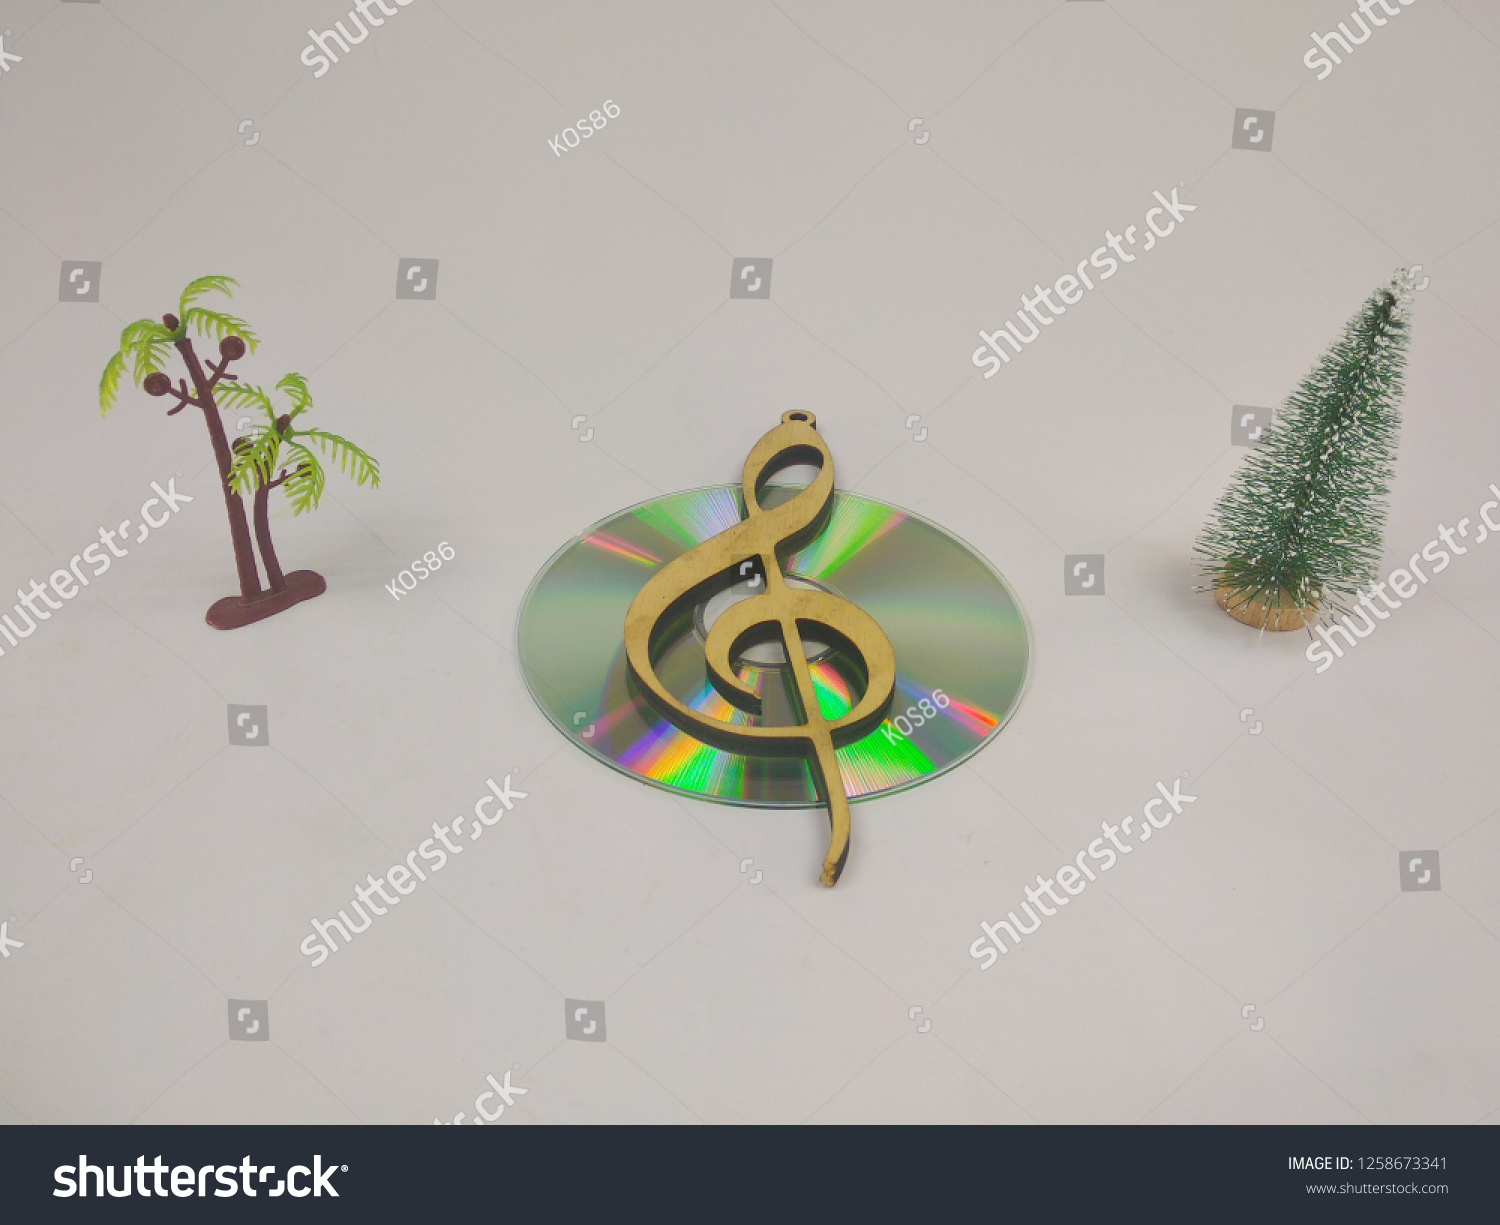 compact discs on a white background.HD. #1258673341